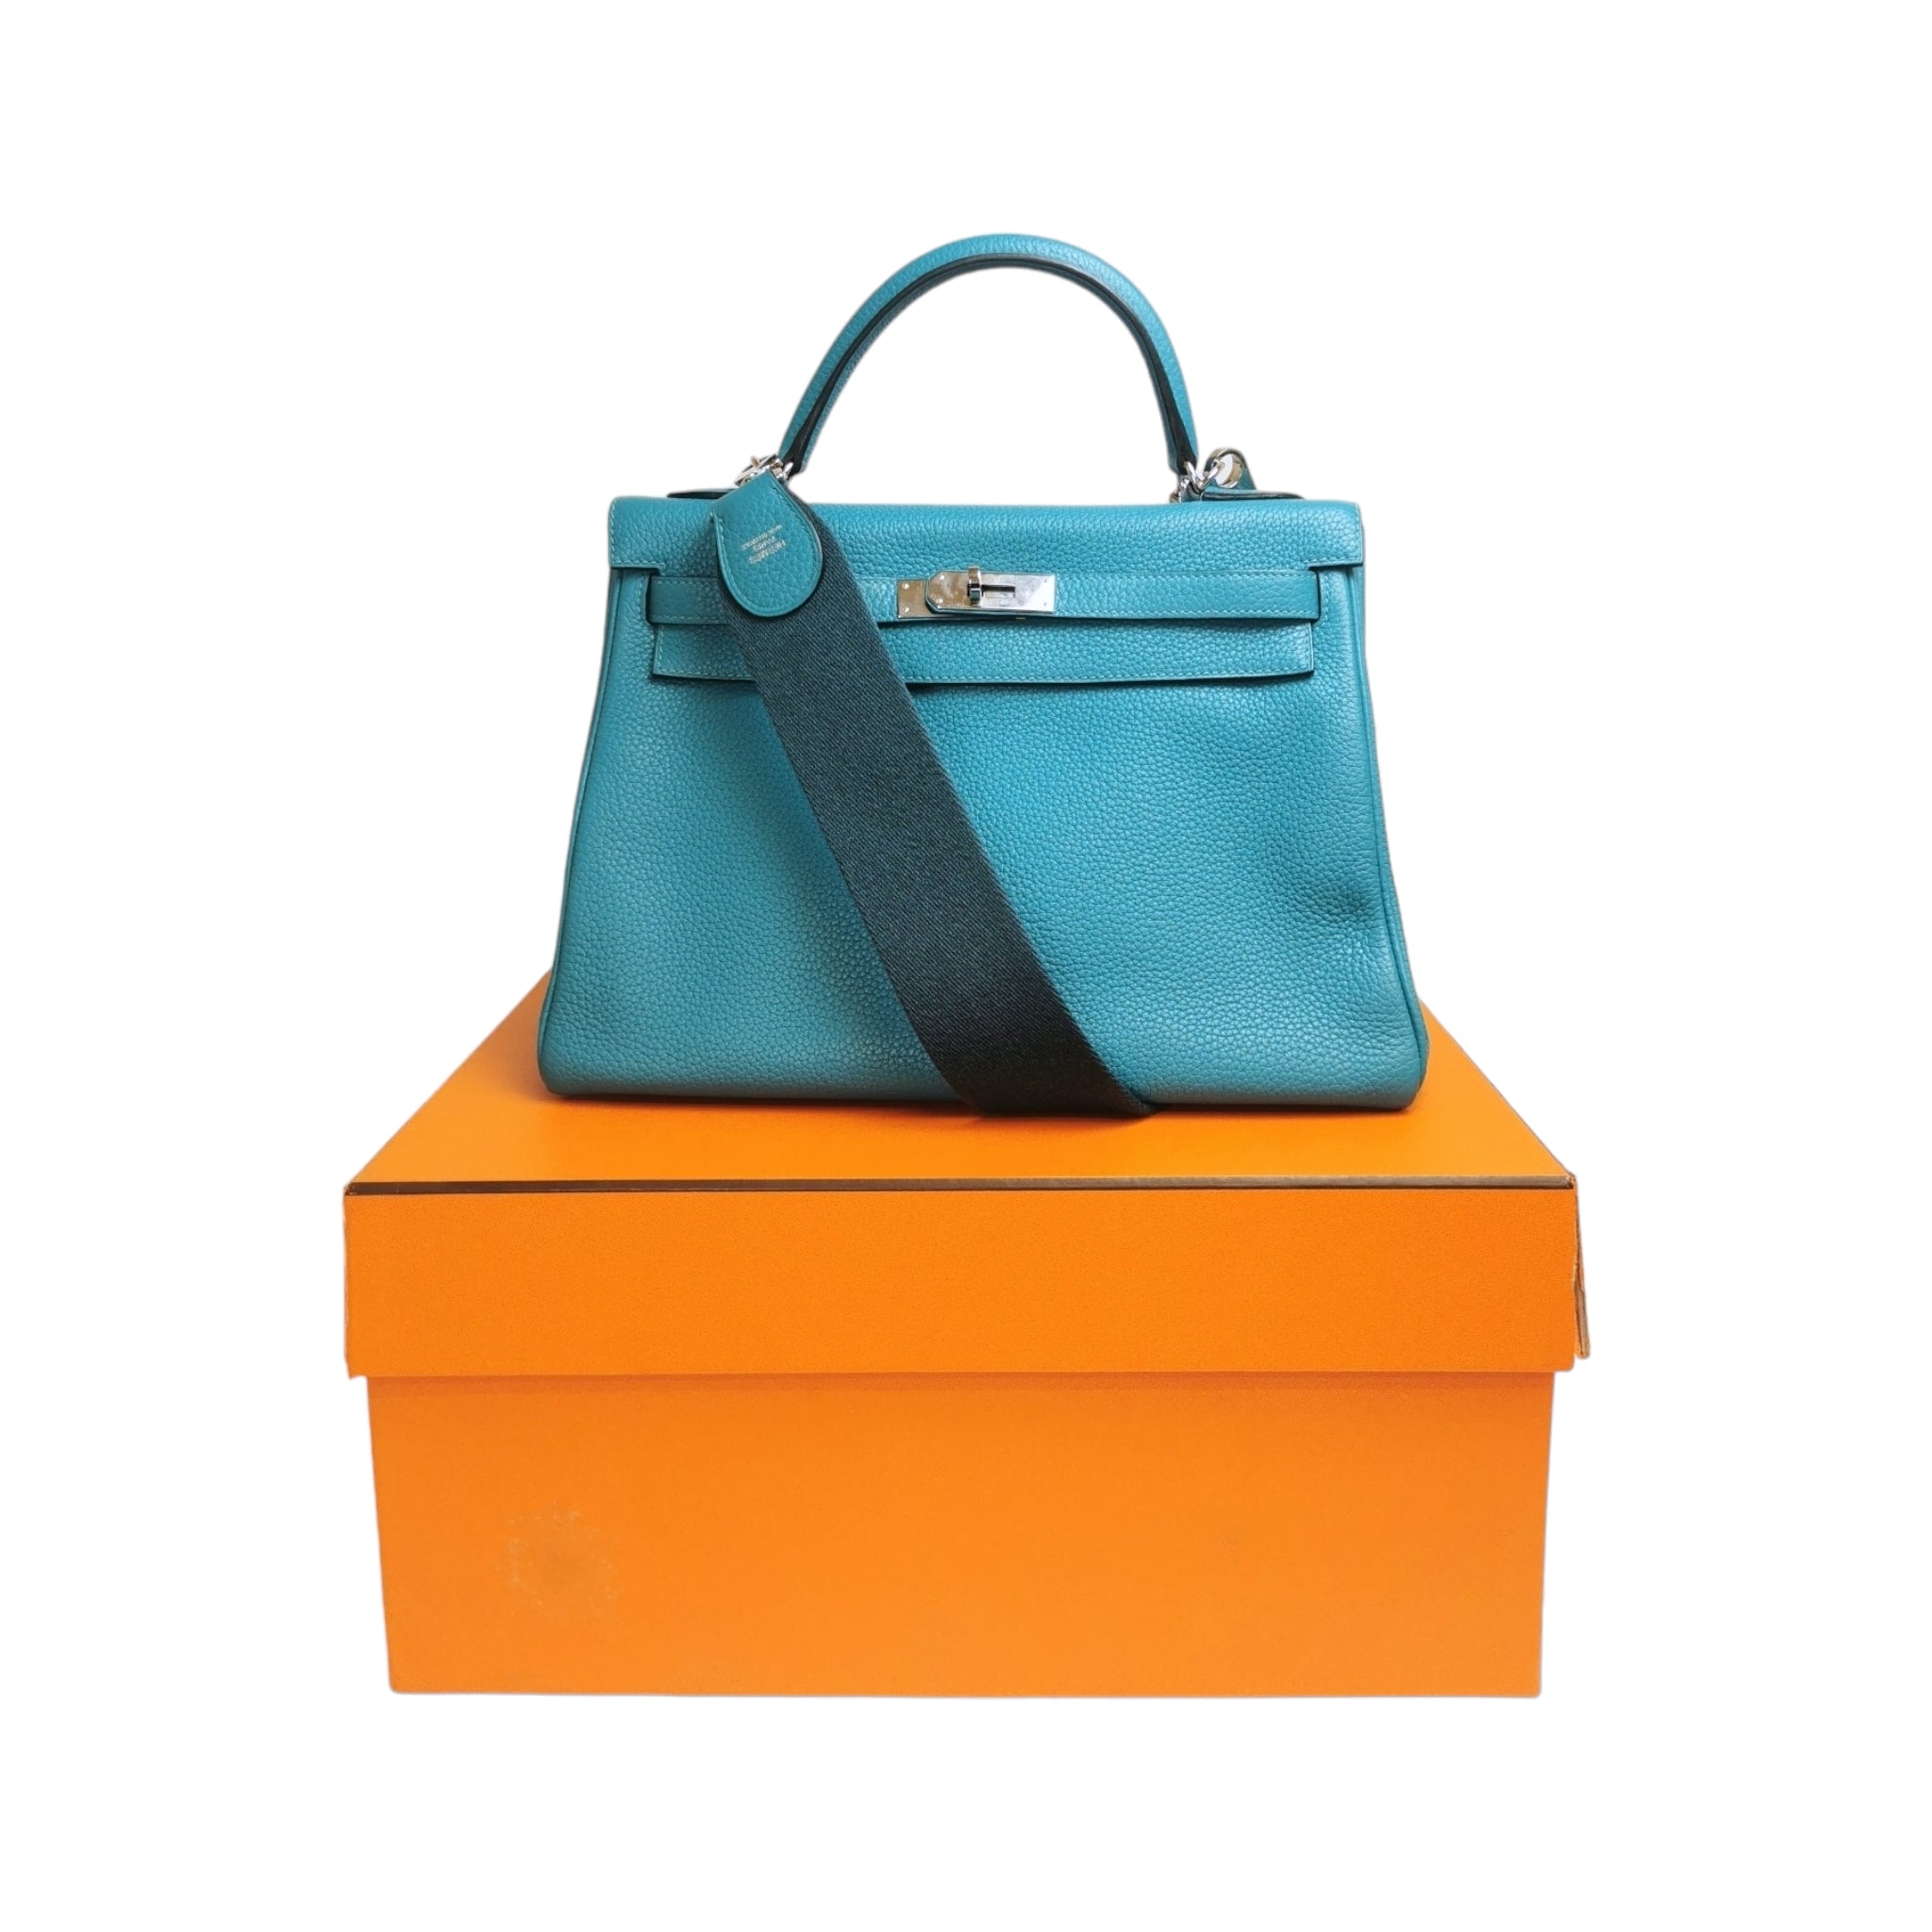 All You Need To Know About the Hermès Kelly Bag Family + Sizes